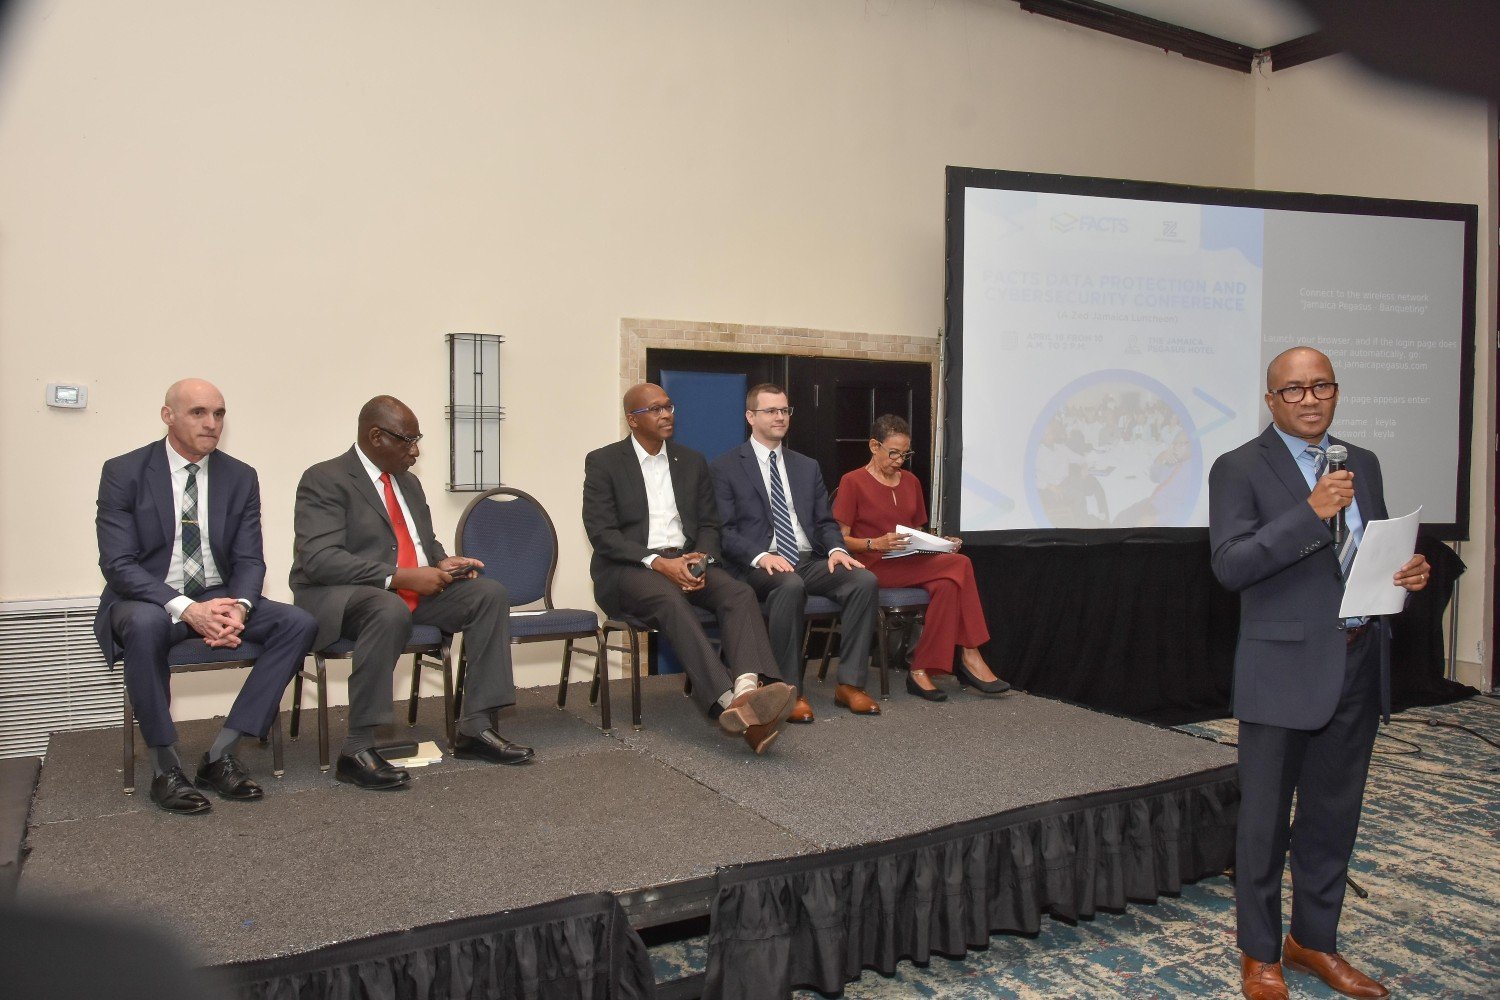 Panel Discussion led by Andrew Lee, CEO Elearning Jamaica